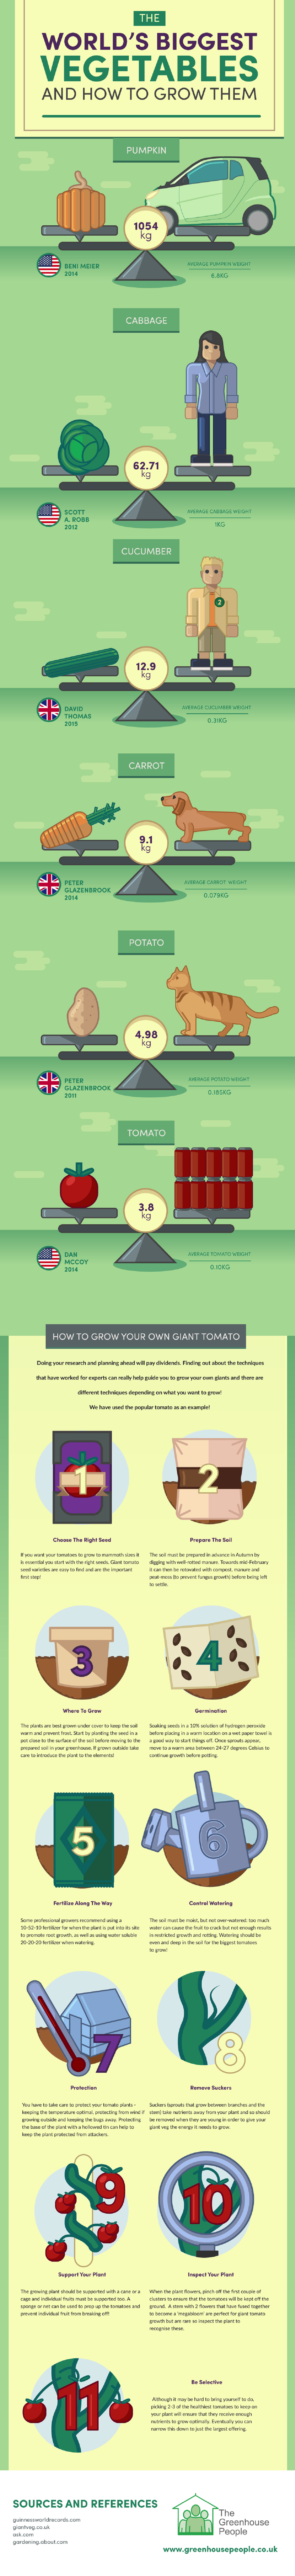 The worlds biggest vegetables #infographic